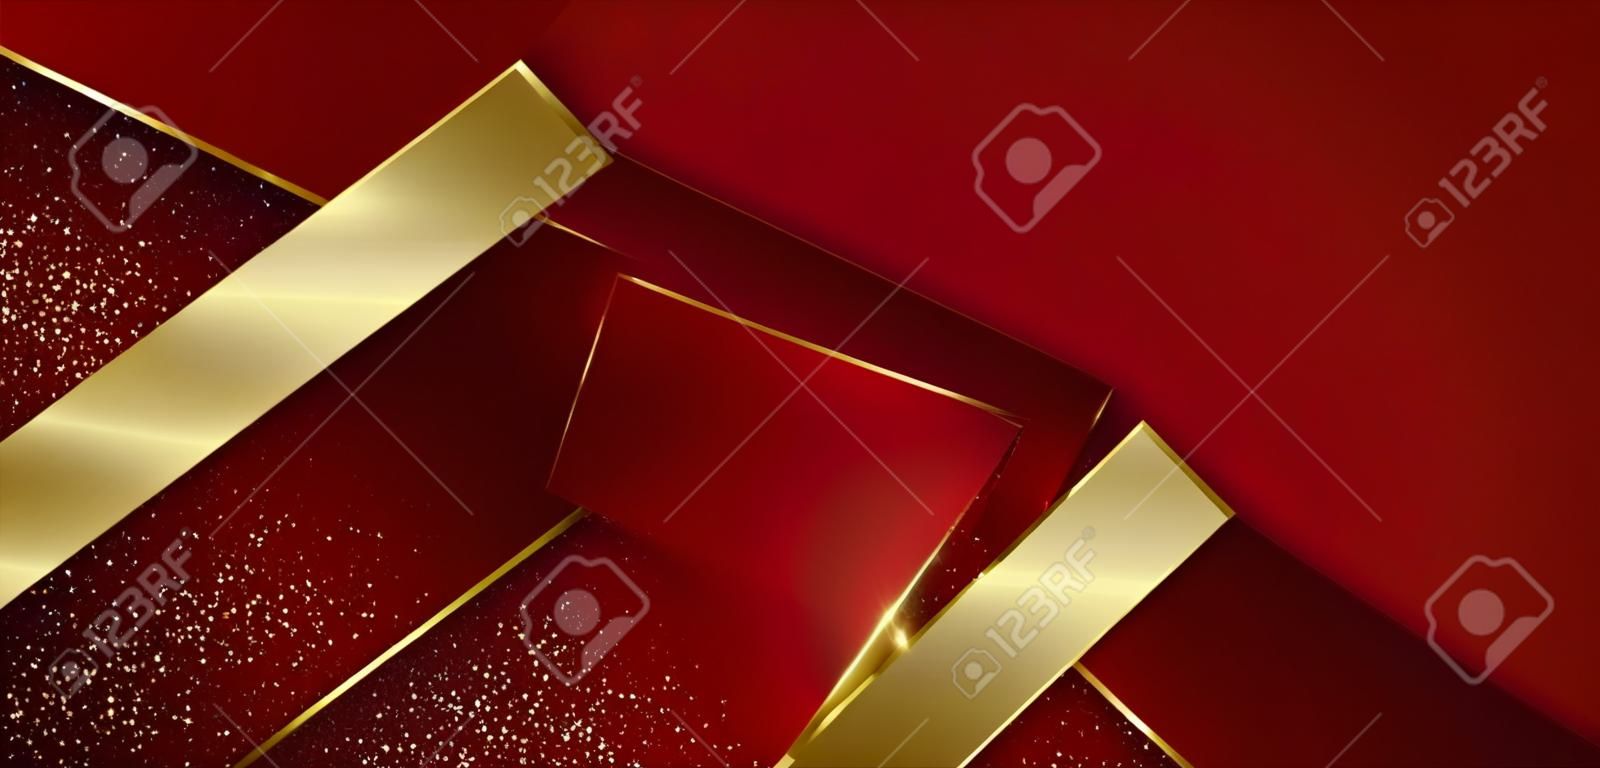 Abstract 3d modern luxury template red color and gold arrow background with golden glitter line light sparkle. Vector illustration